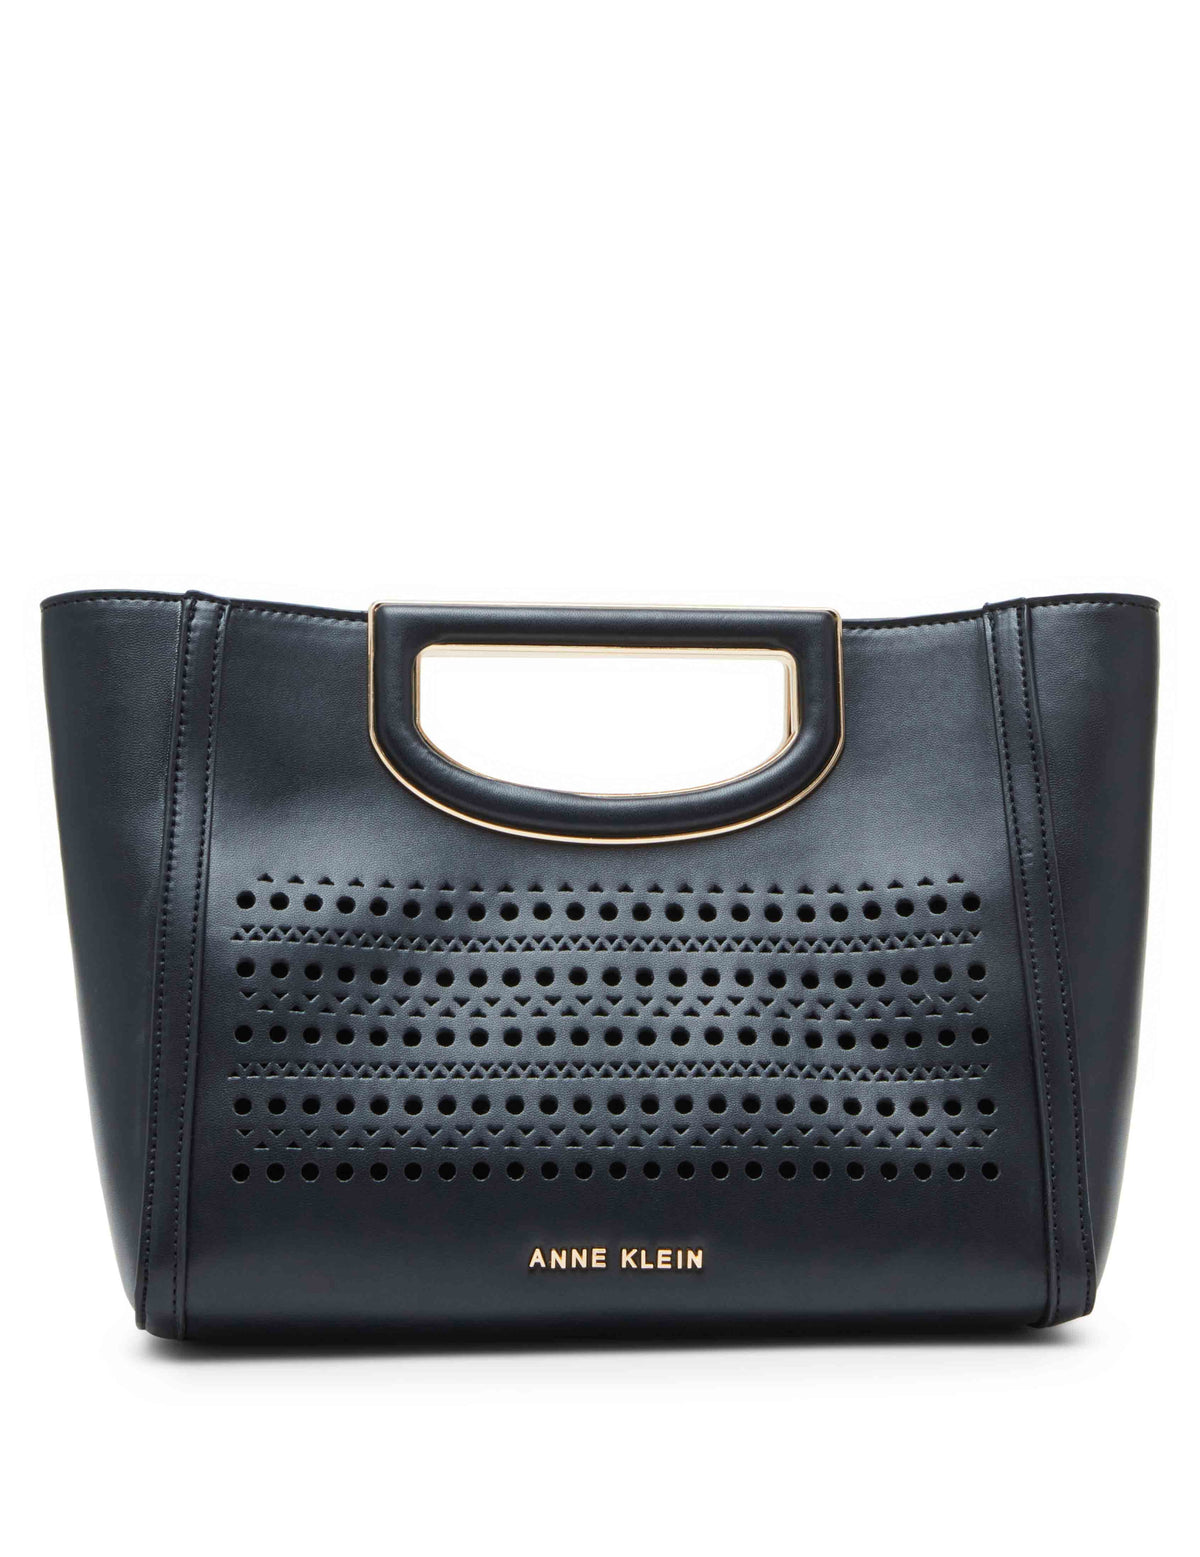 Anne Klein Black Perforated Cut Out Handle Satchel